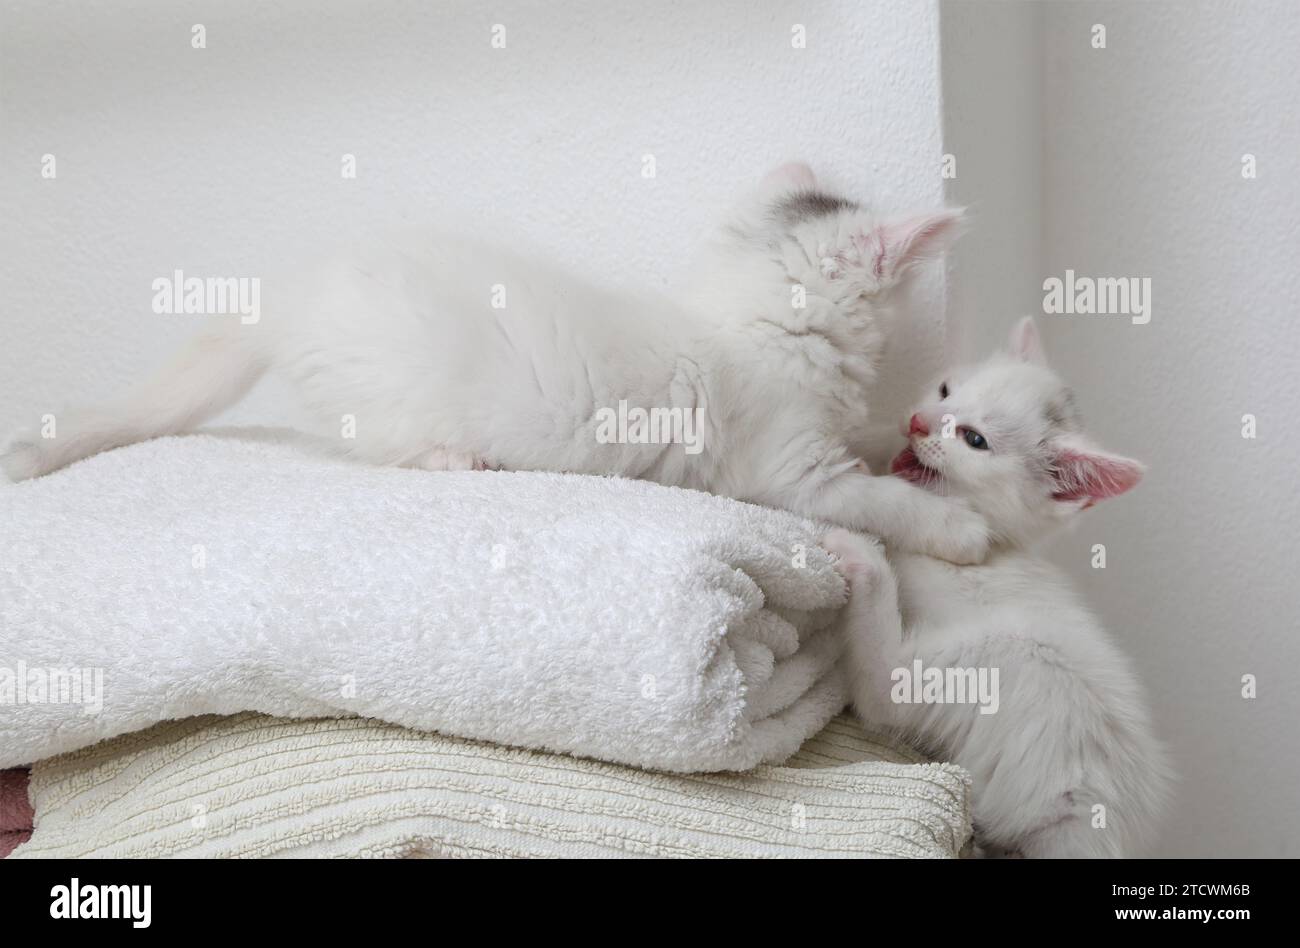 7 Weeks Old White Turkish Angora Cross Kitten with Grey Marking on Head Playing on top of A Pile of Towels Surrey England Stock Photo